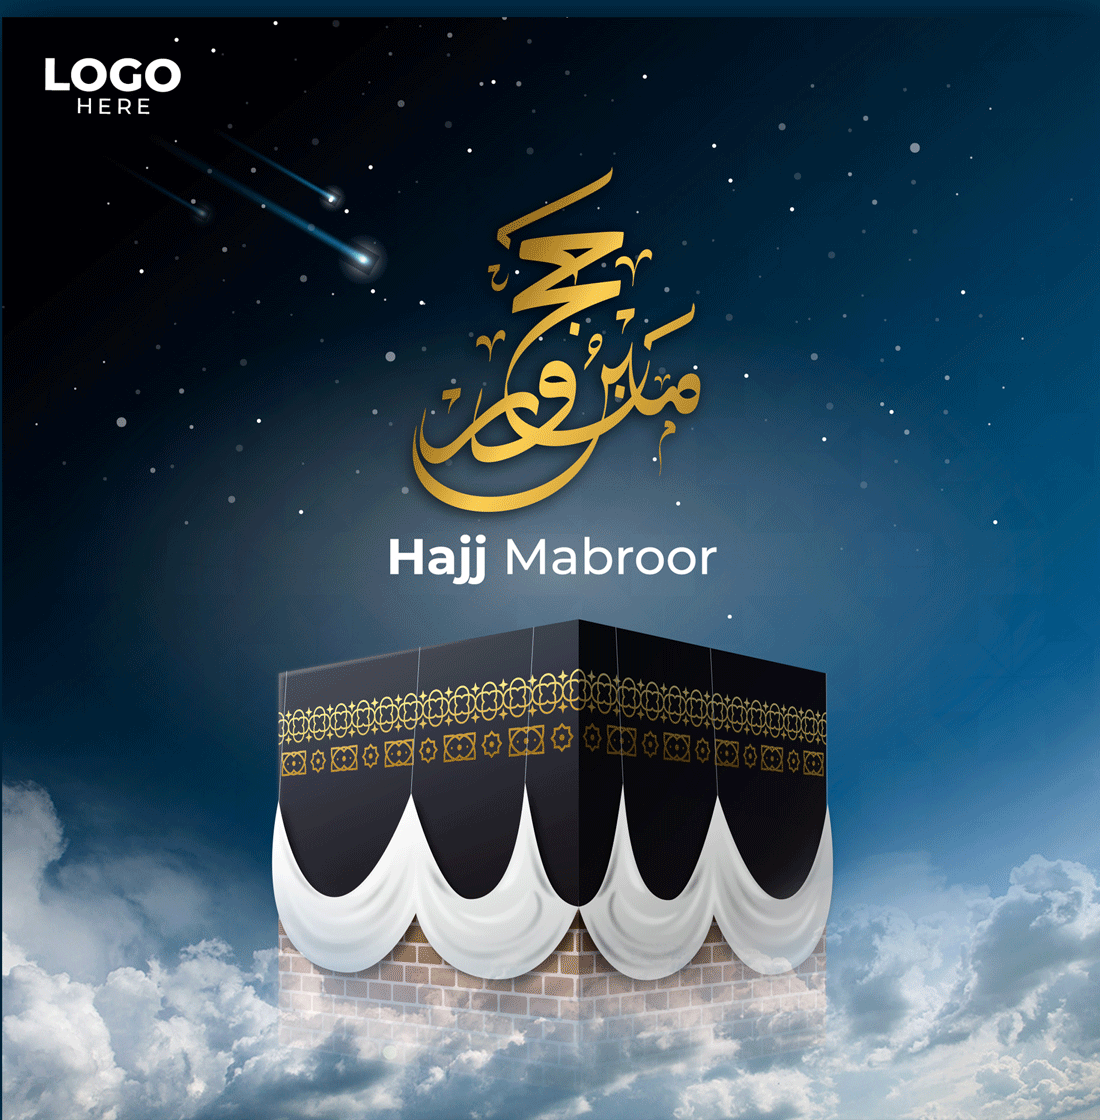 hajj mabrour greeting card islamic floral pattern vector design with kaaba and arabic calligraphy cover image.